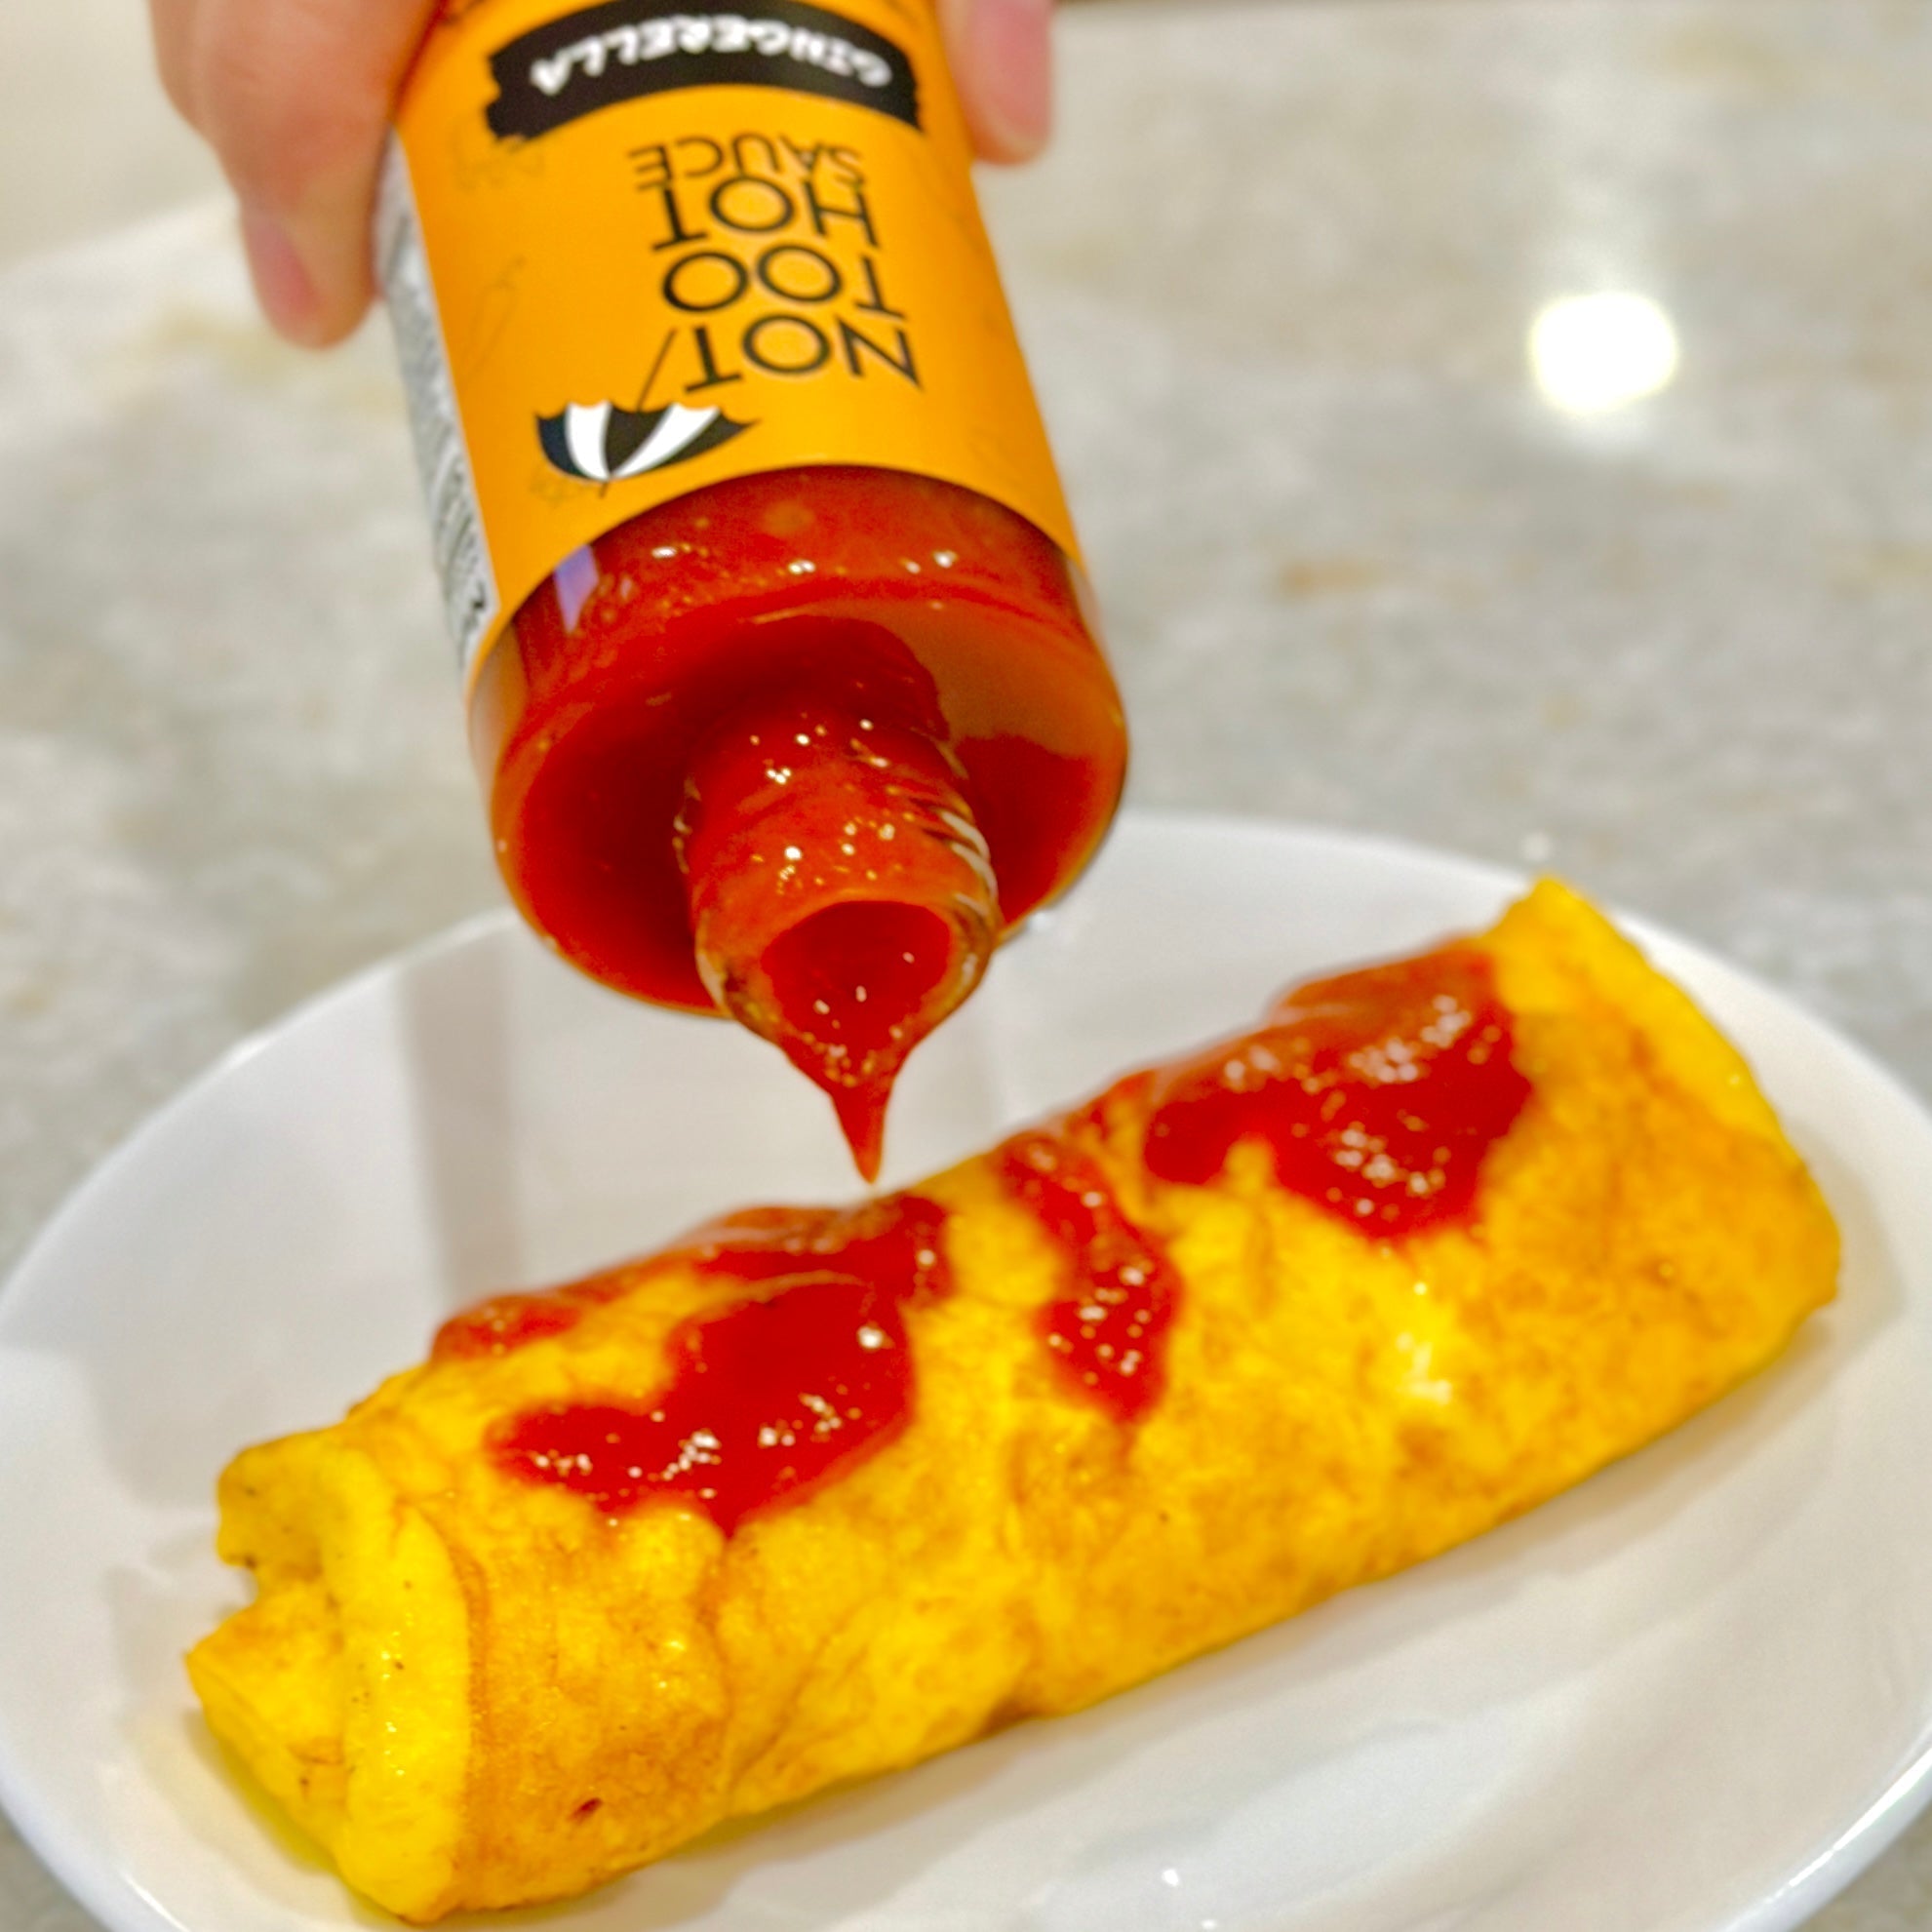 Gingerella 7 oz. Red Jalapeño Ginger Hot Sauce - Try for $2! Not Too Hot Sauce